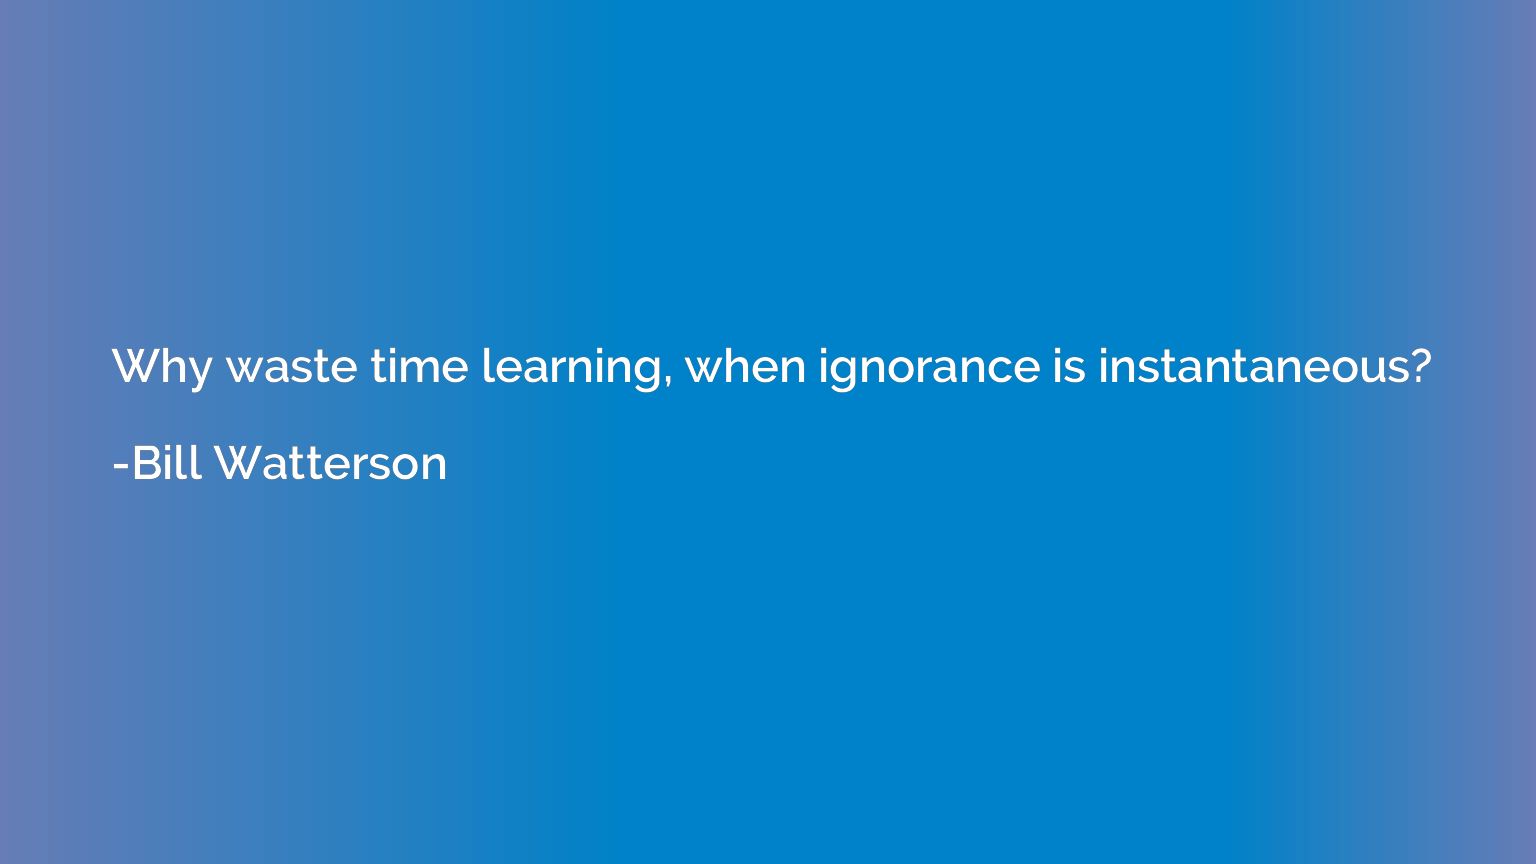 Why waste time learning, when ignorance is instantaneous?